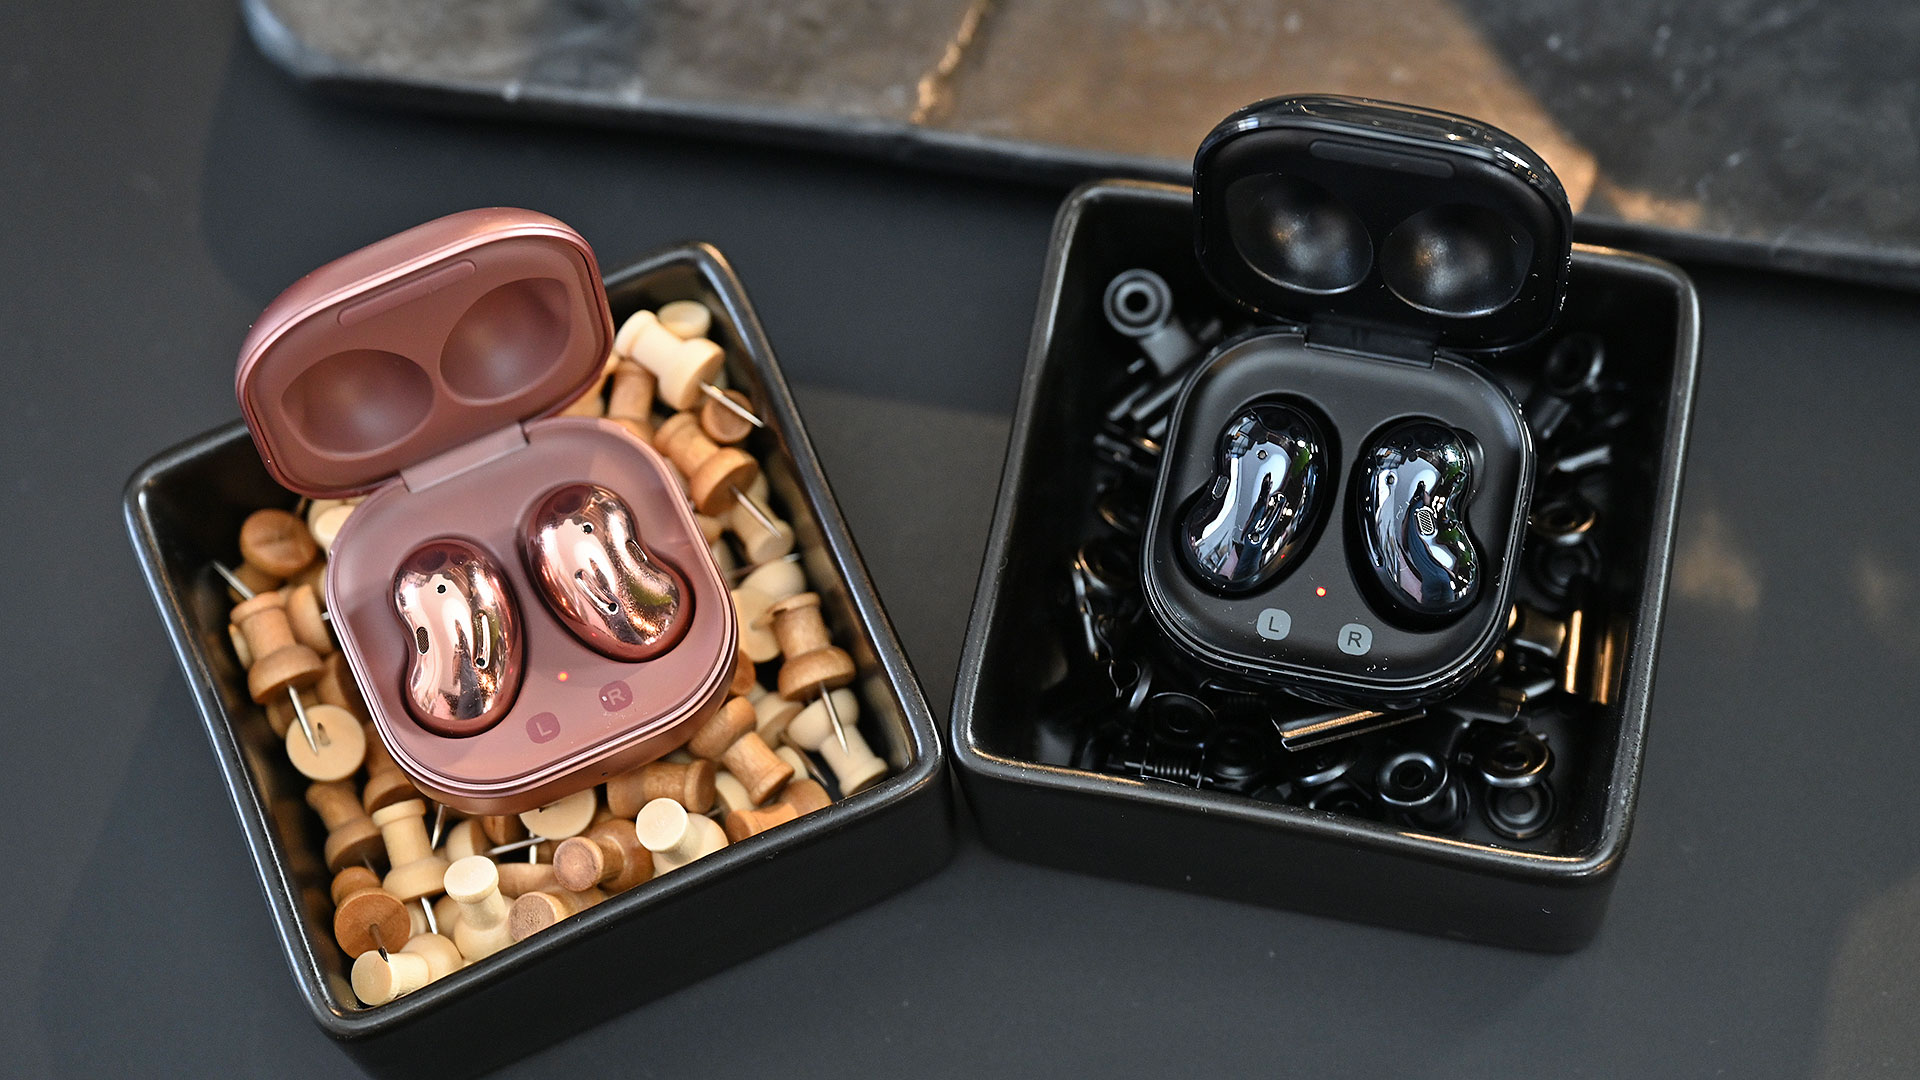 The Galaxy Buds Live come in bronze, black, and white (not pictured). (Photo: Sam Rutherford/Gizmodo)